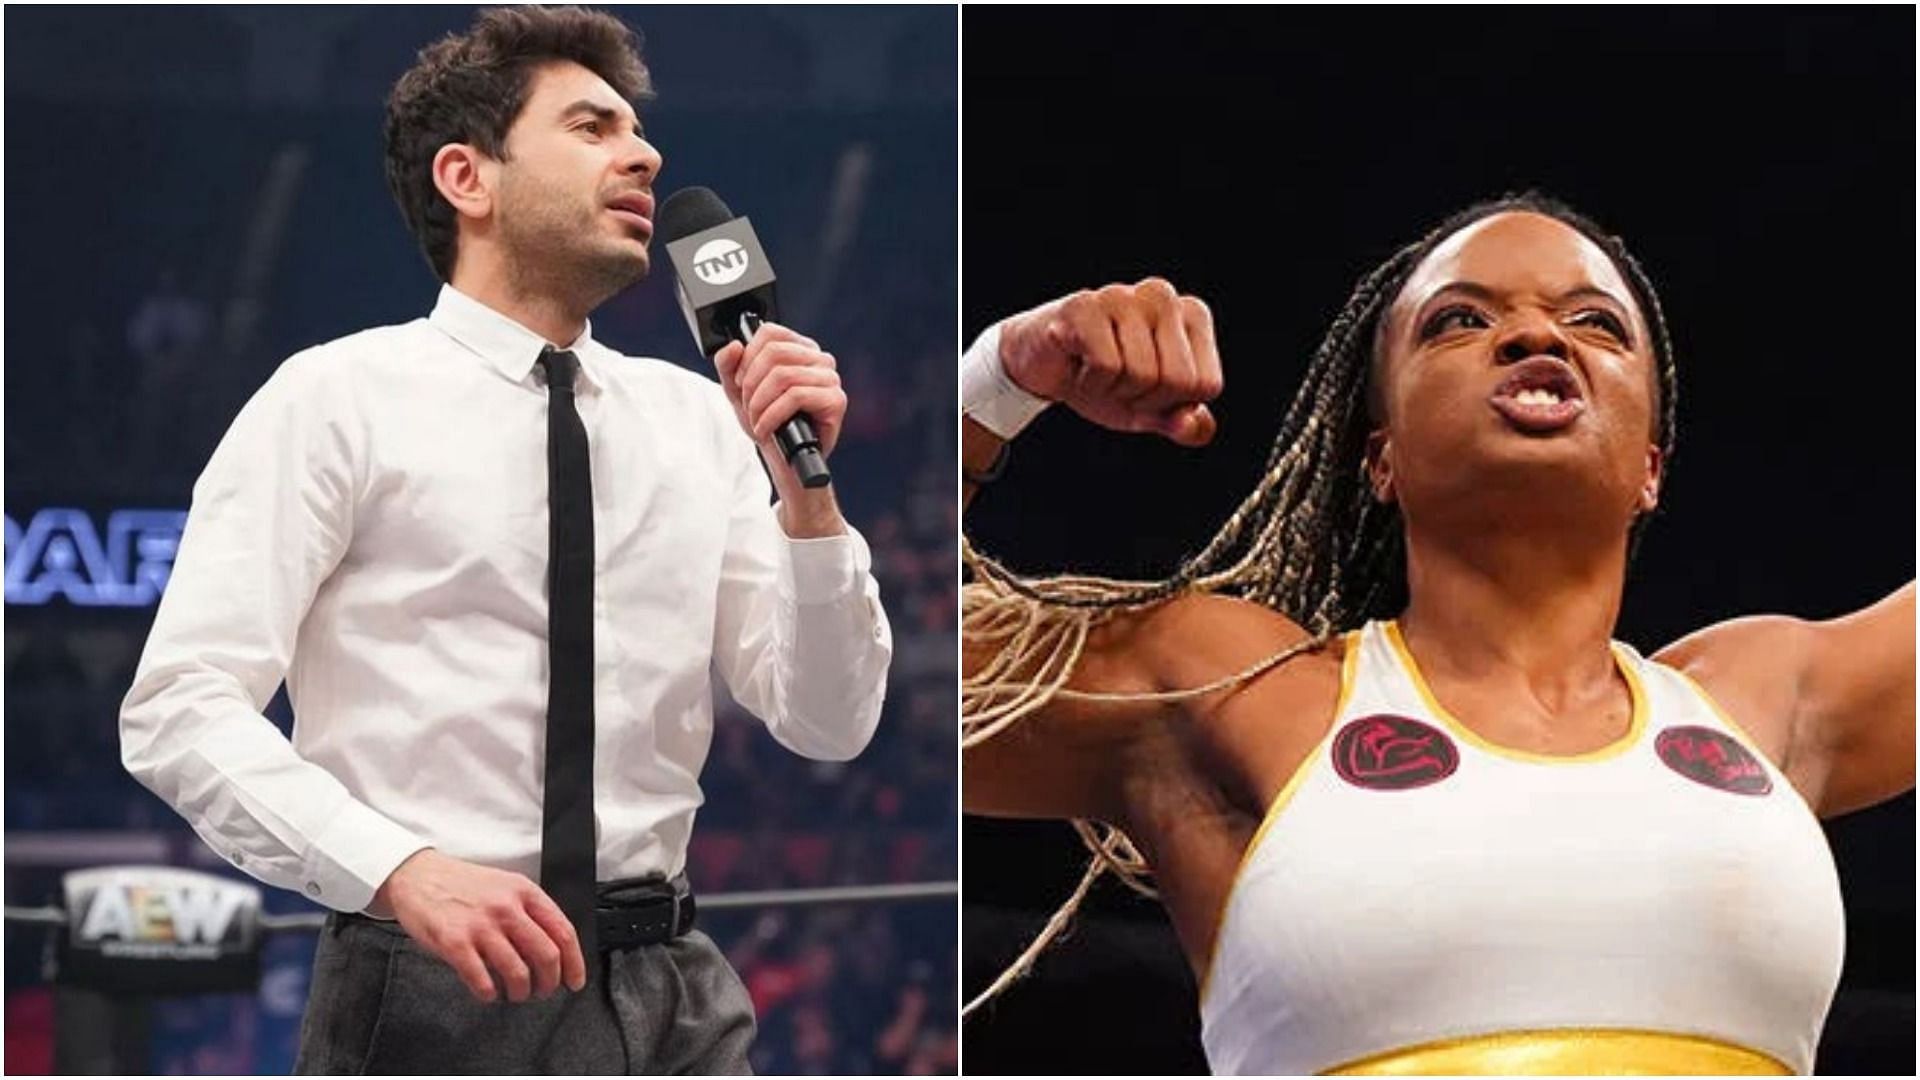 "You're doing more damage by speaking" - Former WWE writer weighs in on issues between Tony Khan and Big Swole